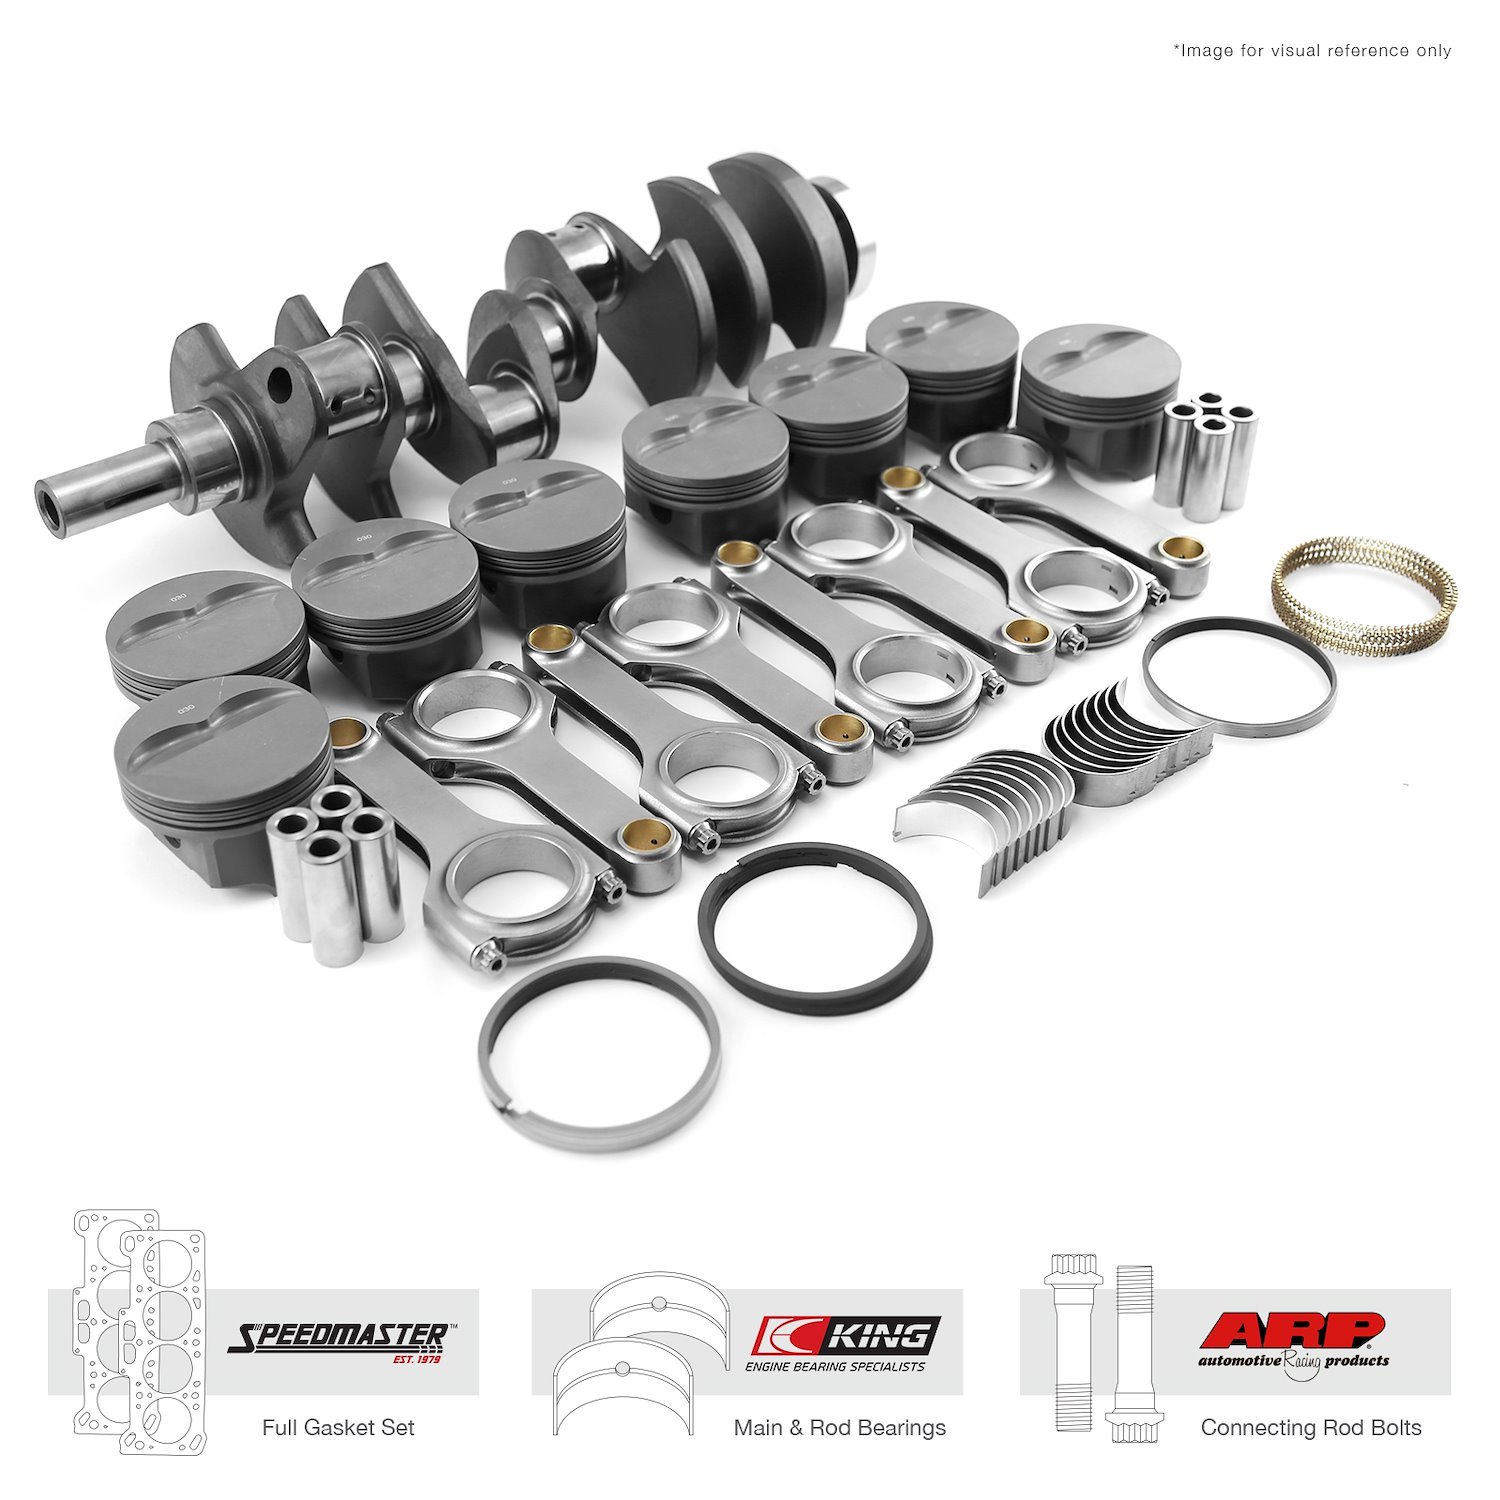 1-290-005 Chevy SBC 350 3.750 in. 383 ci 2Pc-Seal Rotating Assembly Kit - Sportsman Series